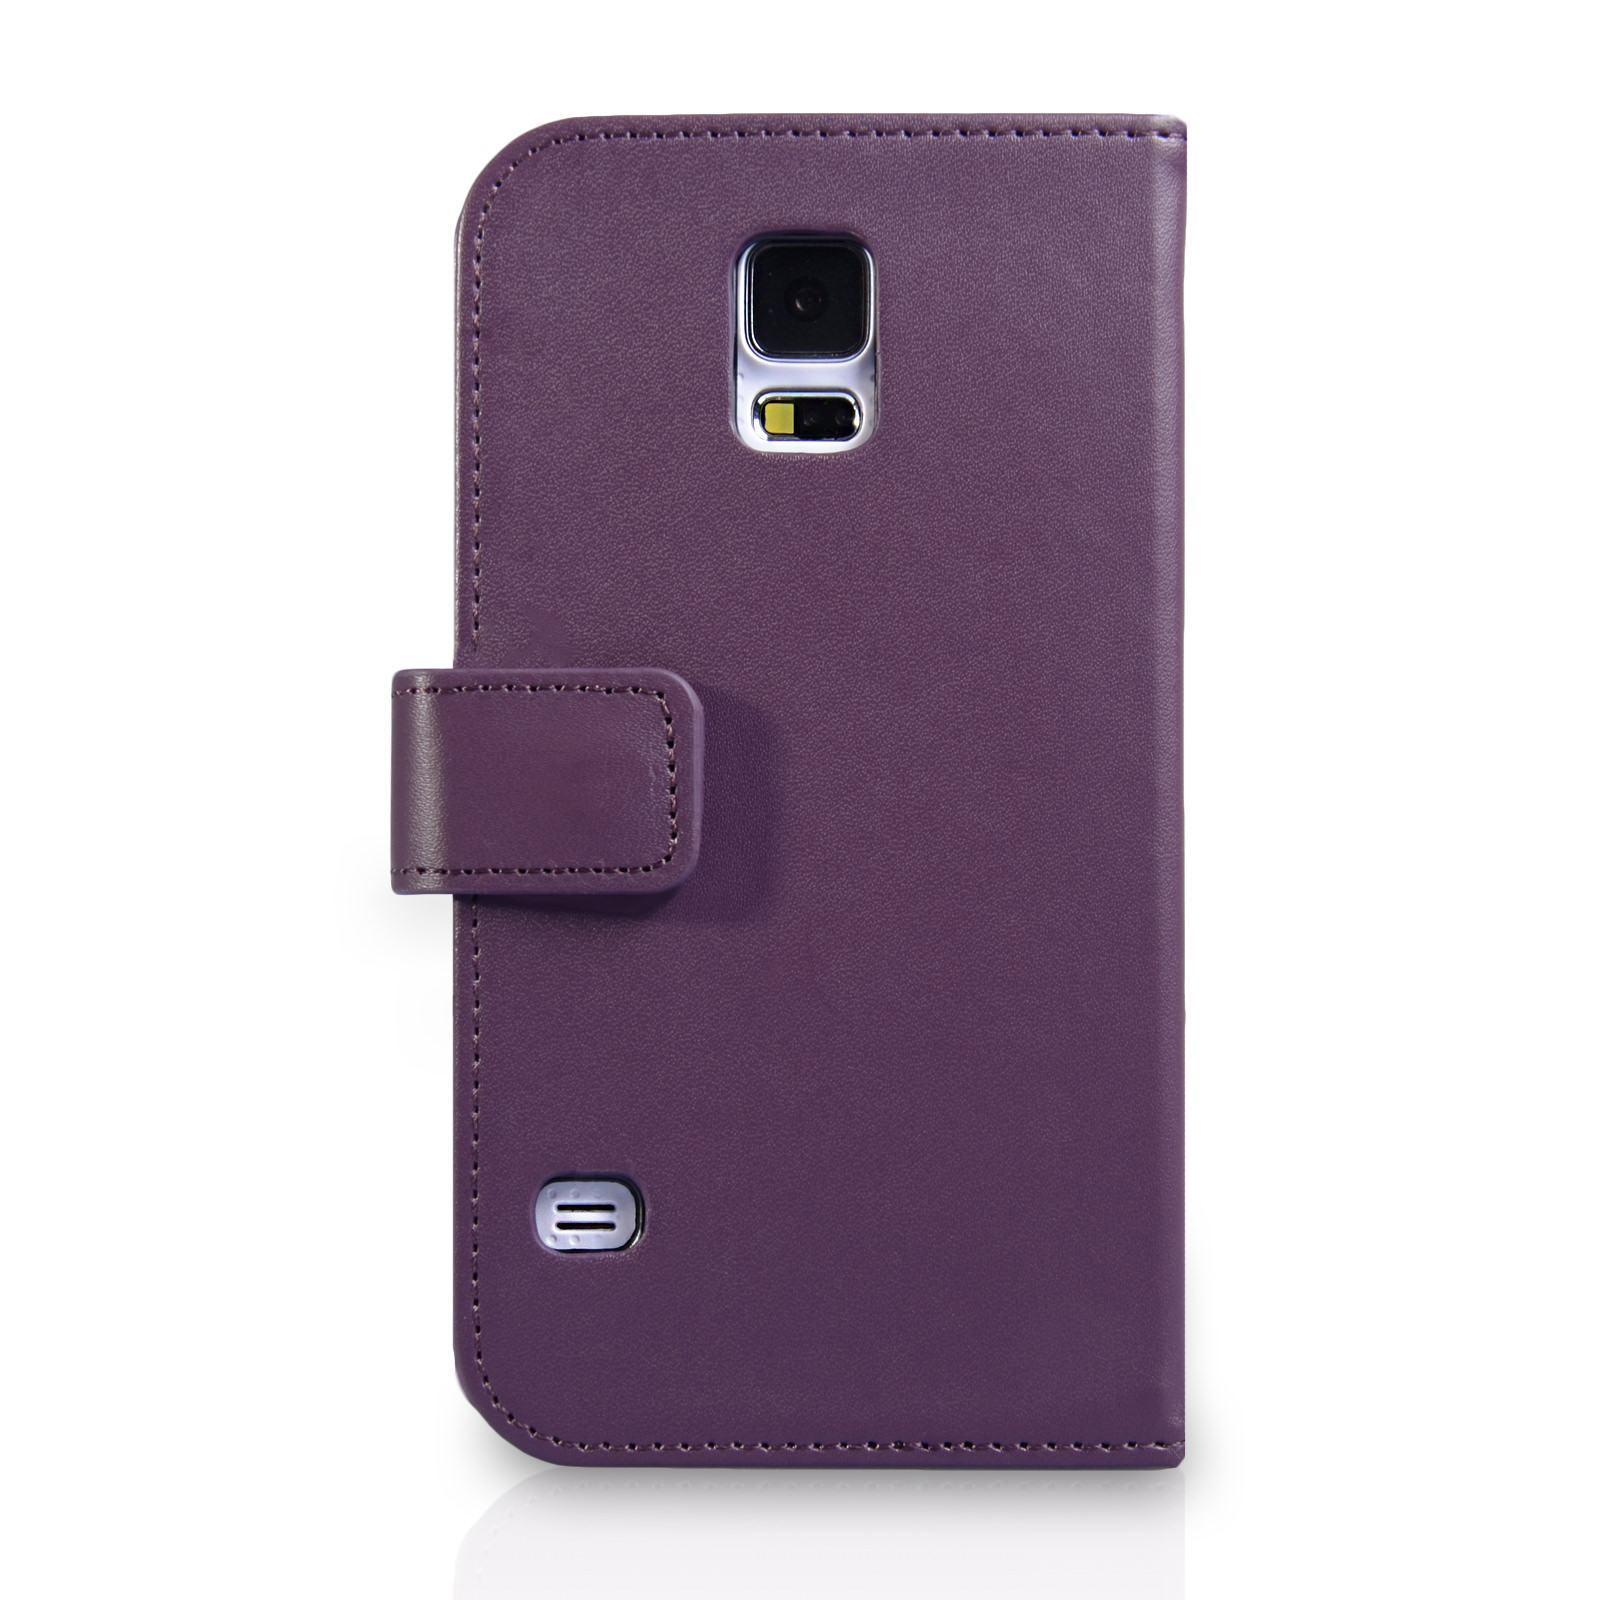 YouSave Samsung Galaxy S5 Leather-Effect Wallet Case - Purple